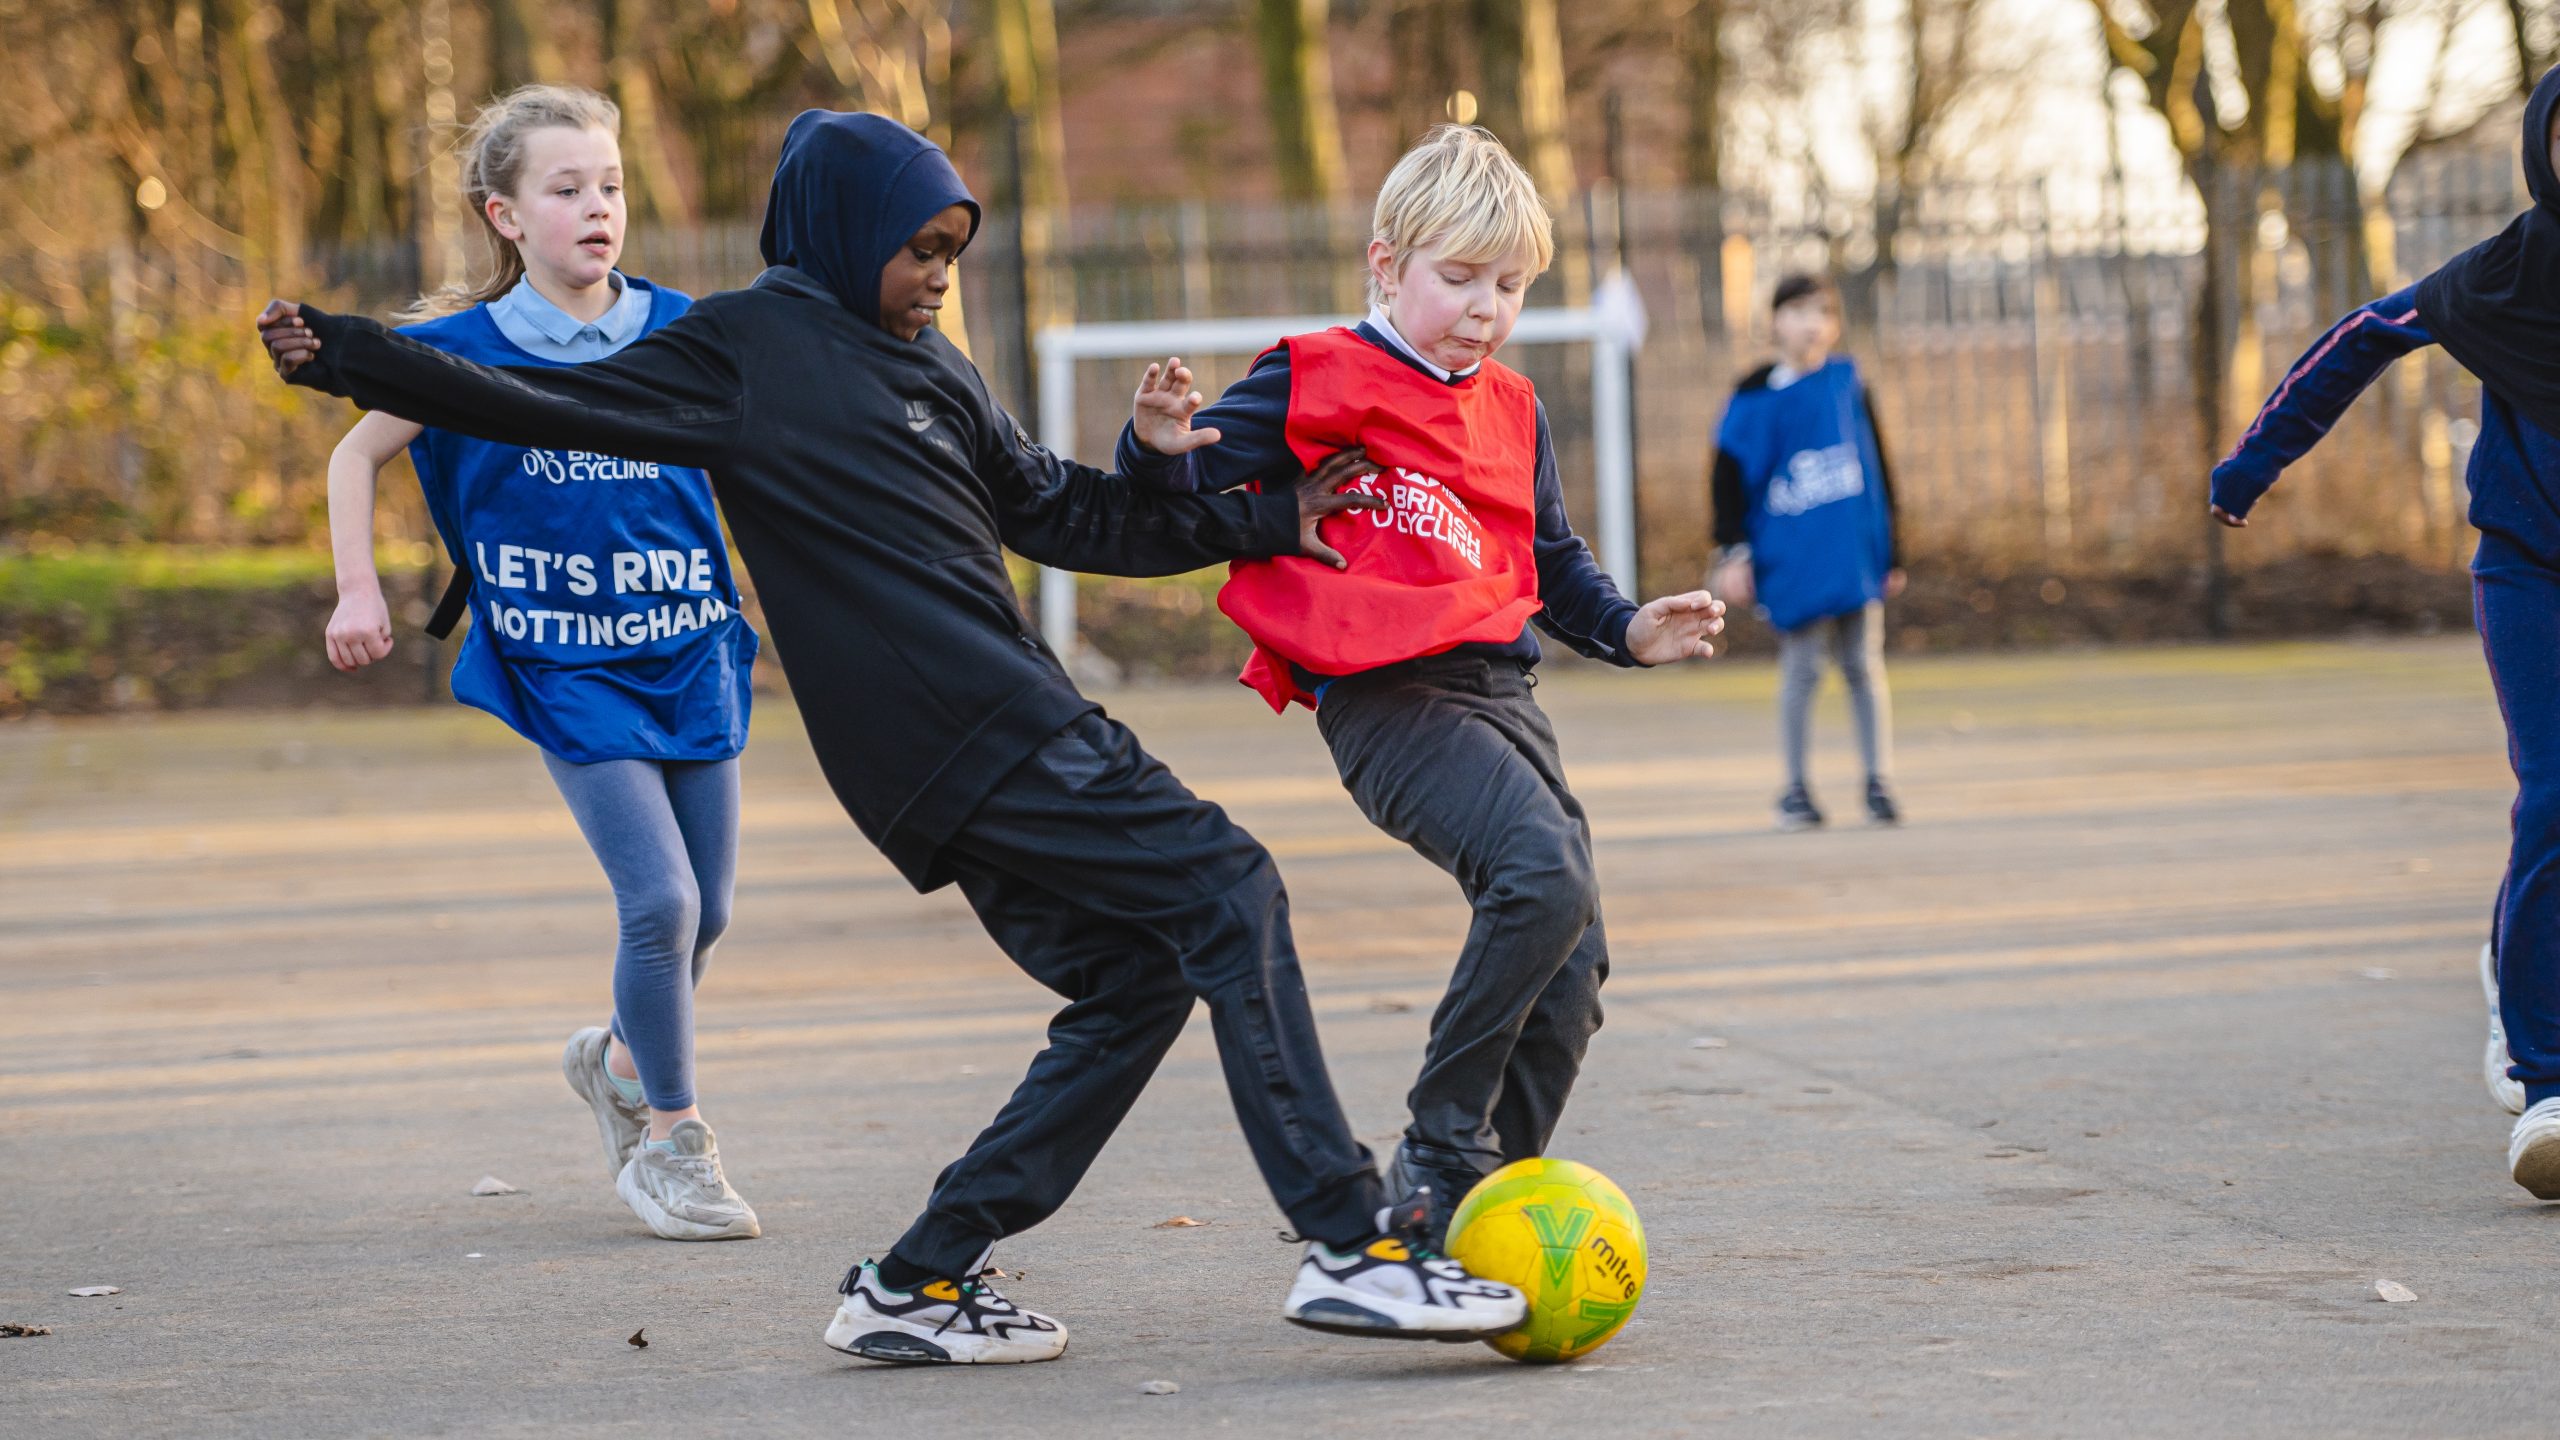 A young Muslim girl and young white boy playing football together at school